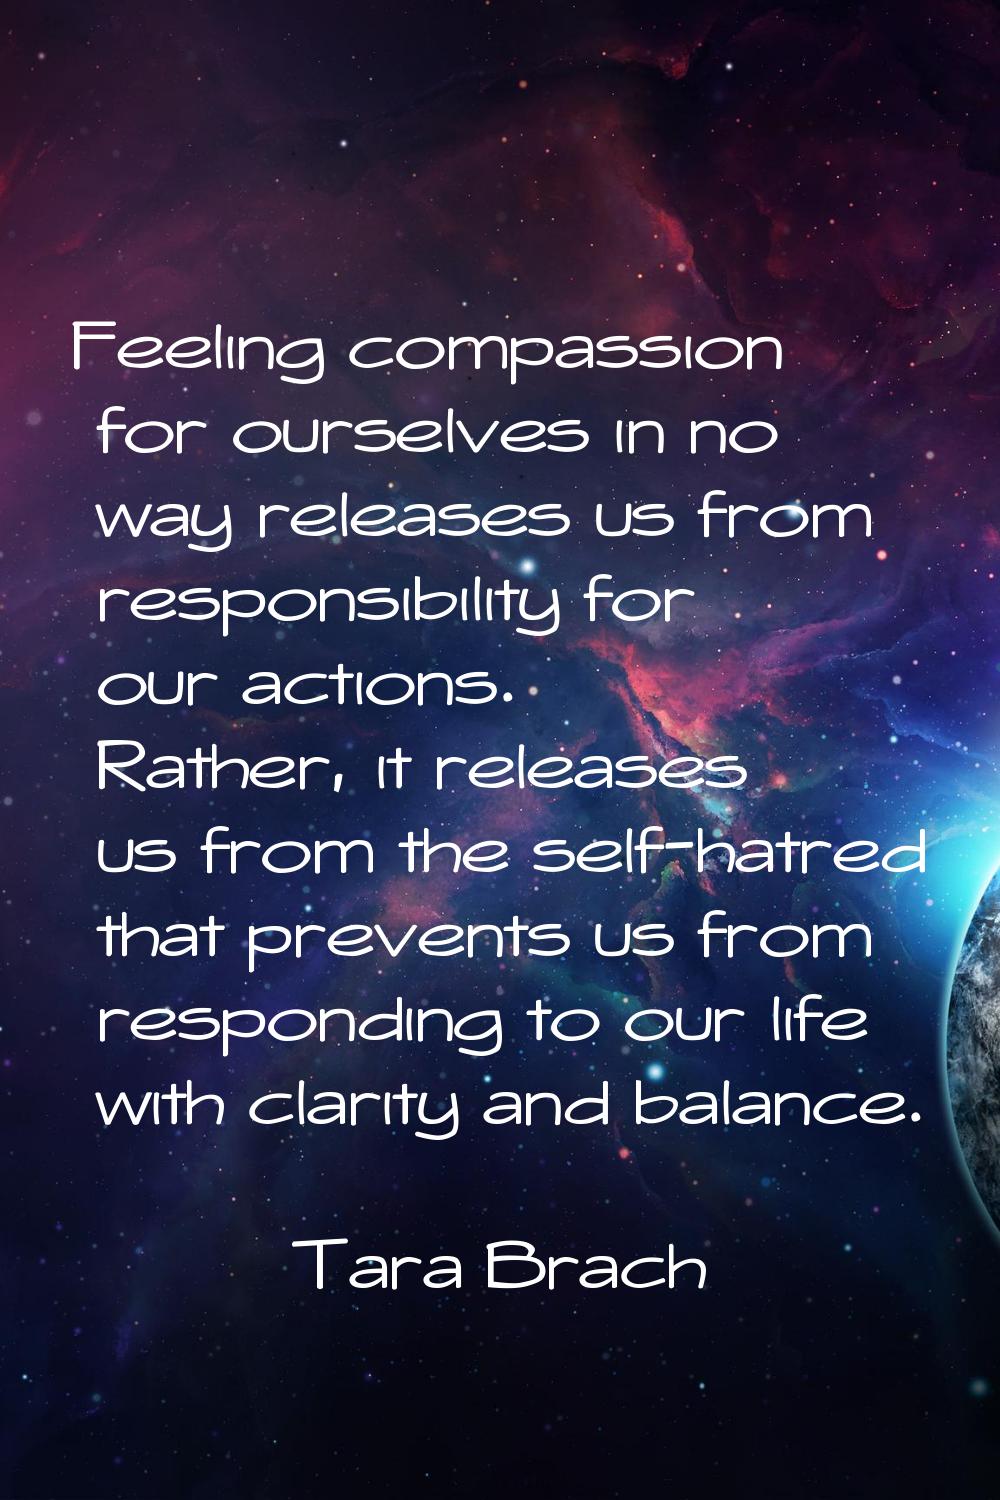 Feeling compassion for ourselves in no way releases us from responsibility for our actions. Rather,